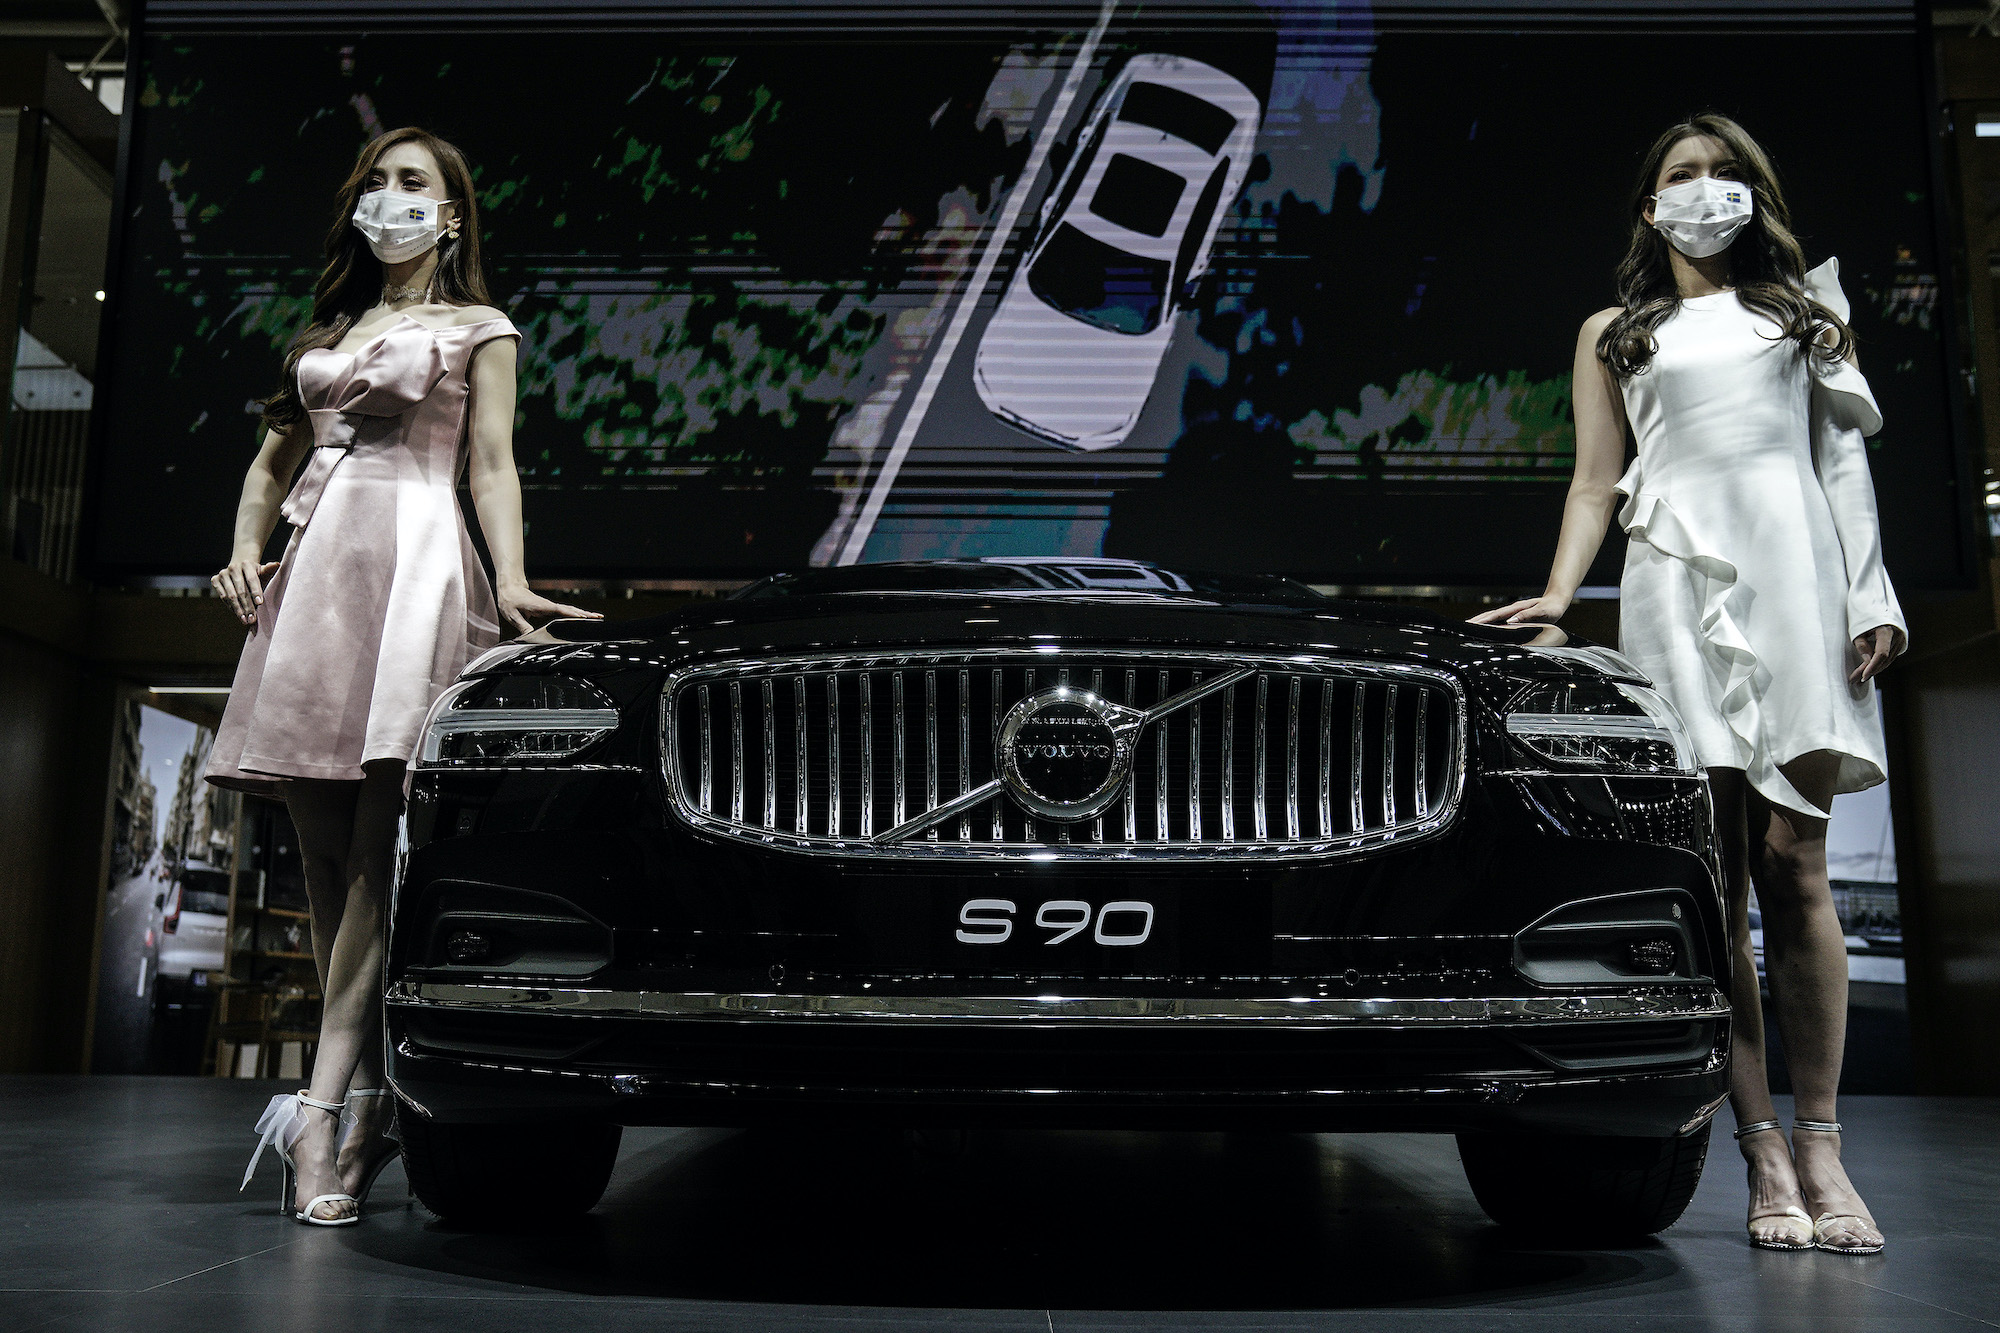 Models wear masks as a precaution while displaying a Volvo S90 in the Volvo stand during the 18th Central China International Auto Show